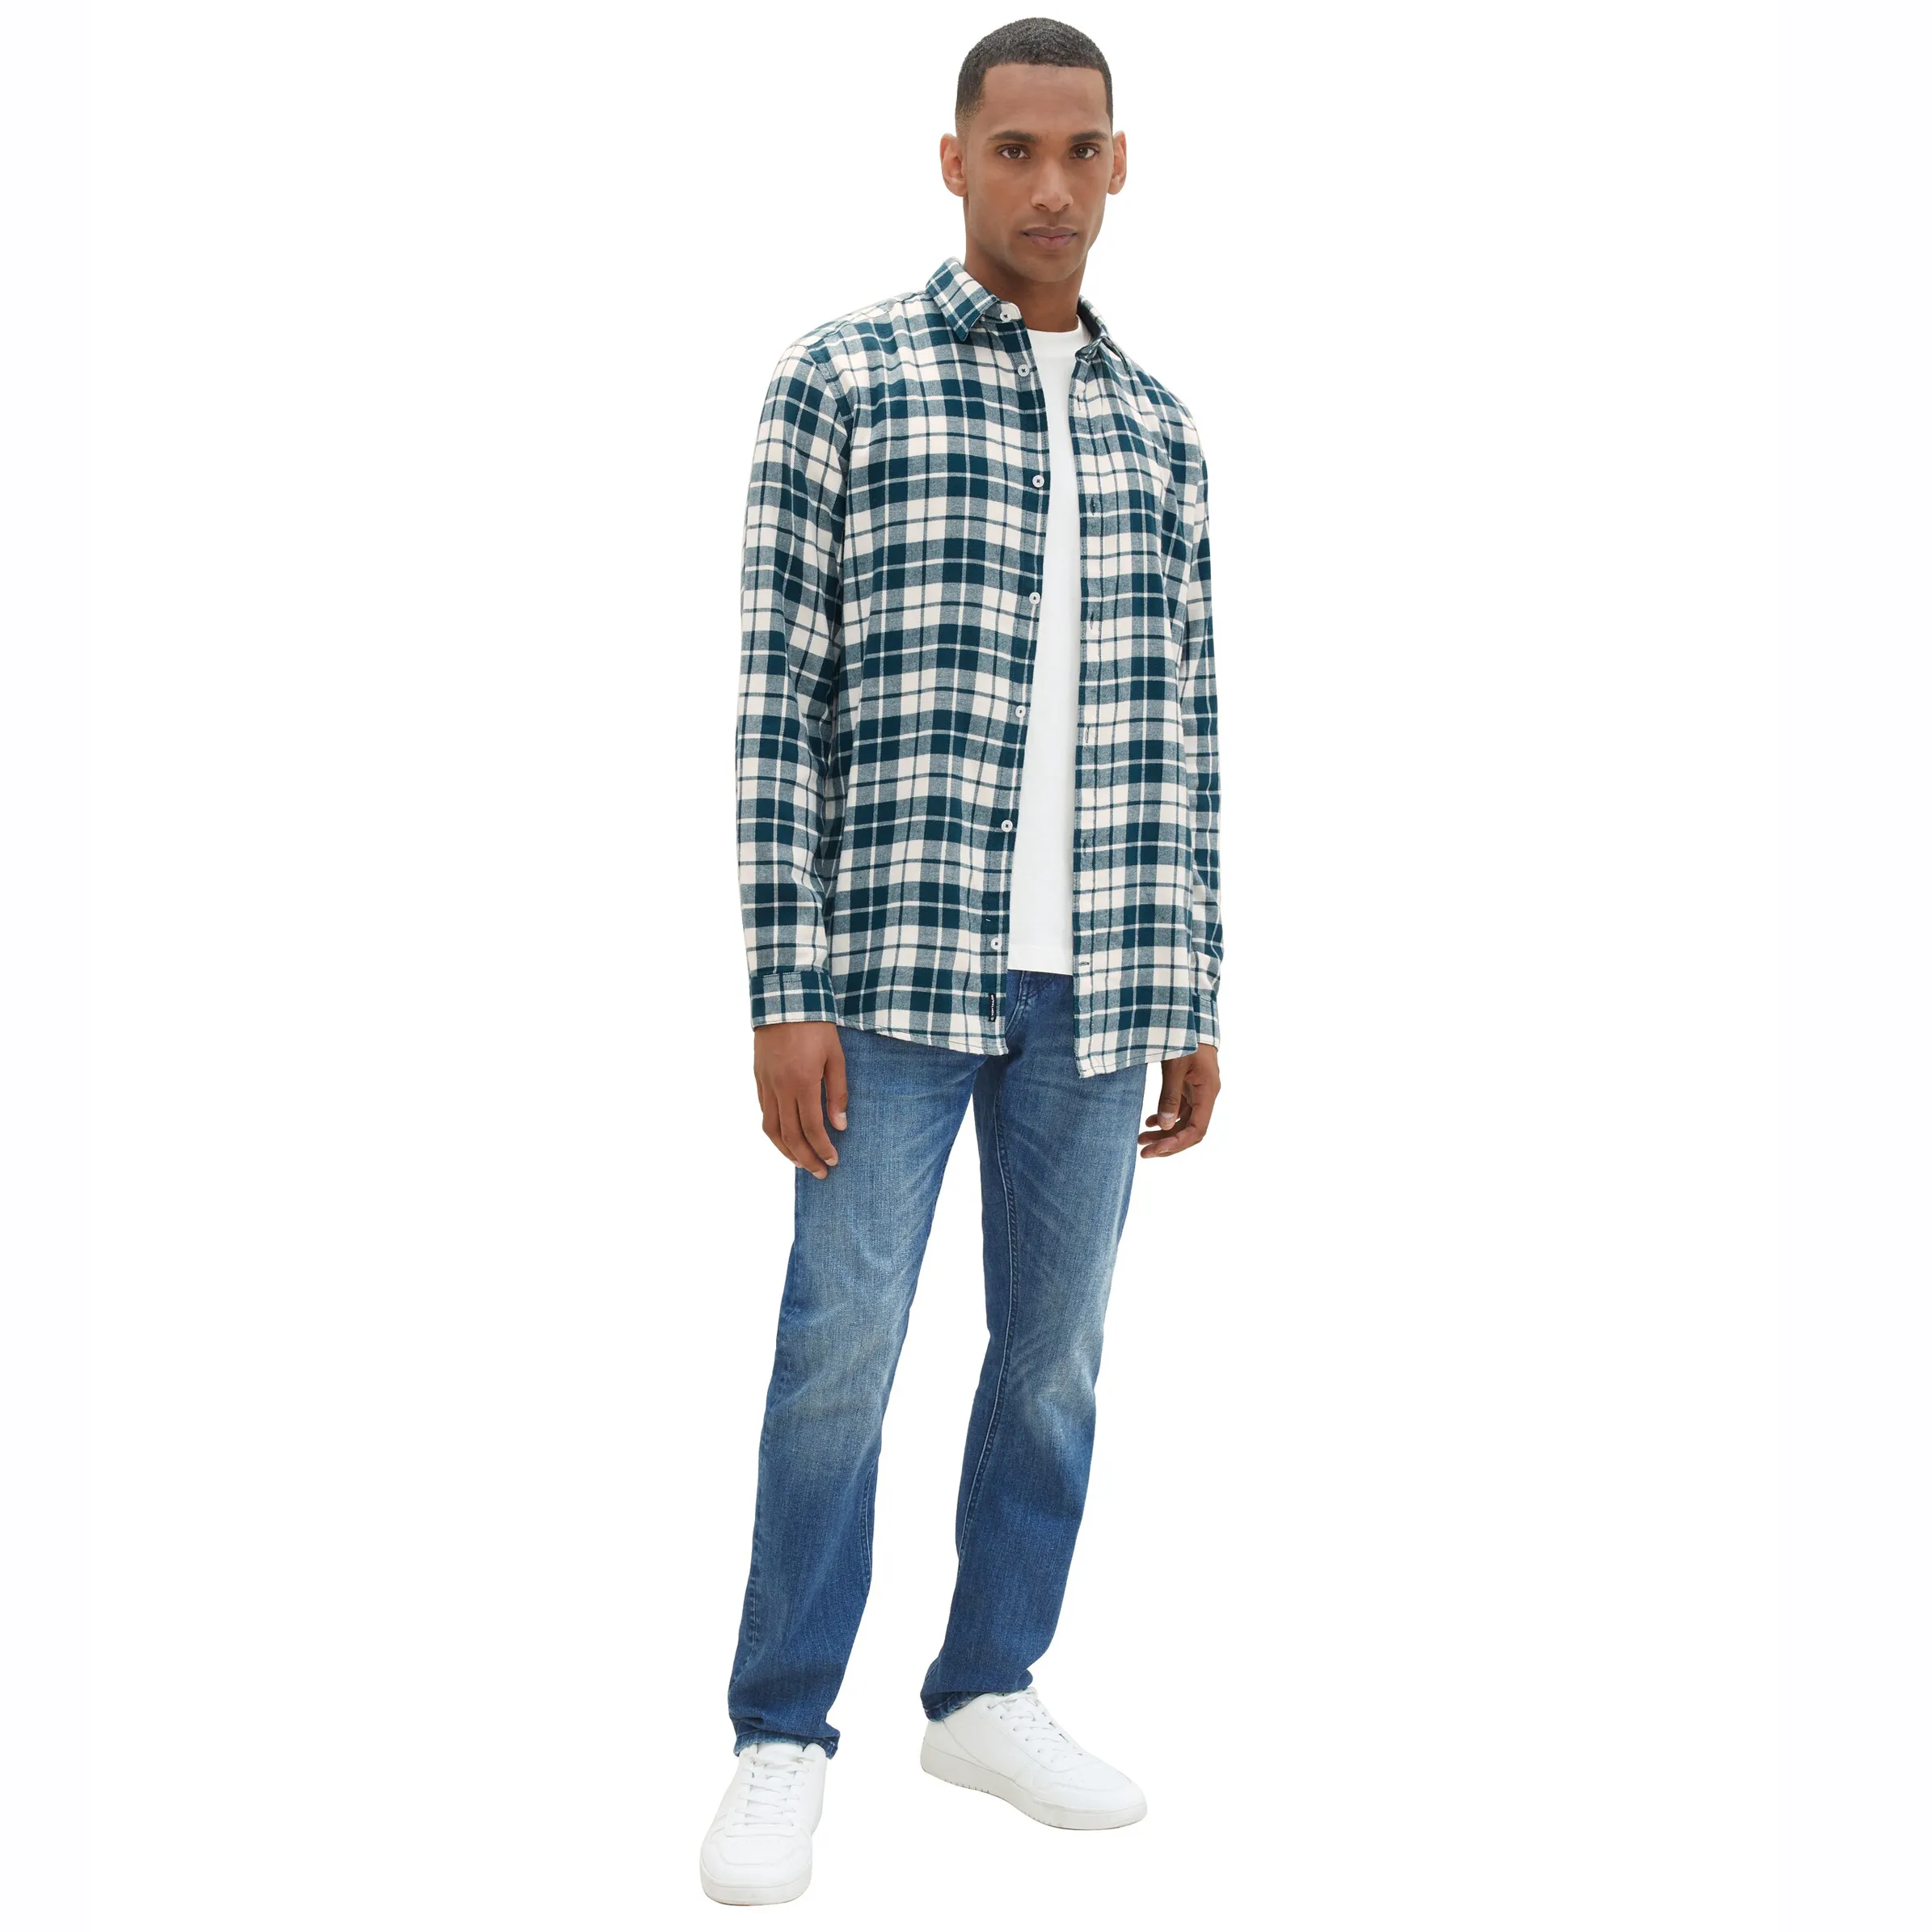 Tom Tailor 1038760 checked shirt Weiß 887480 33845 4